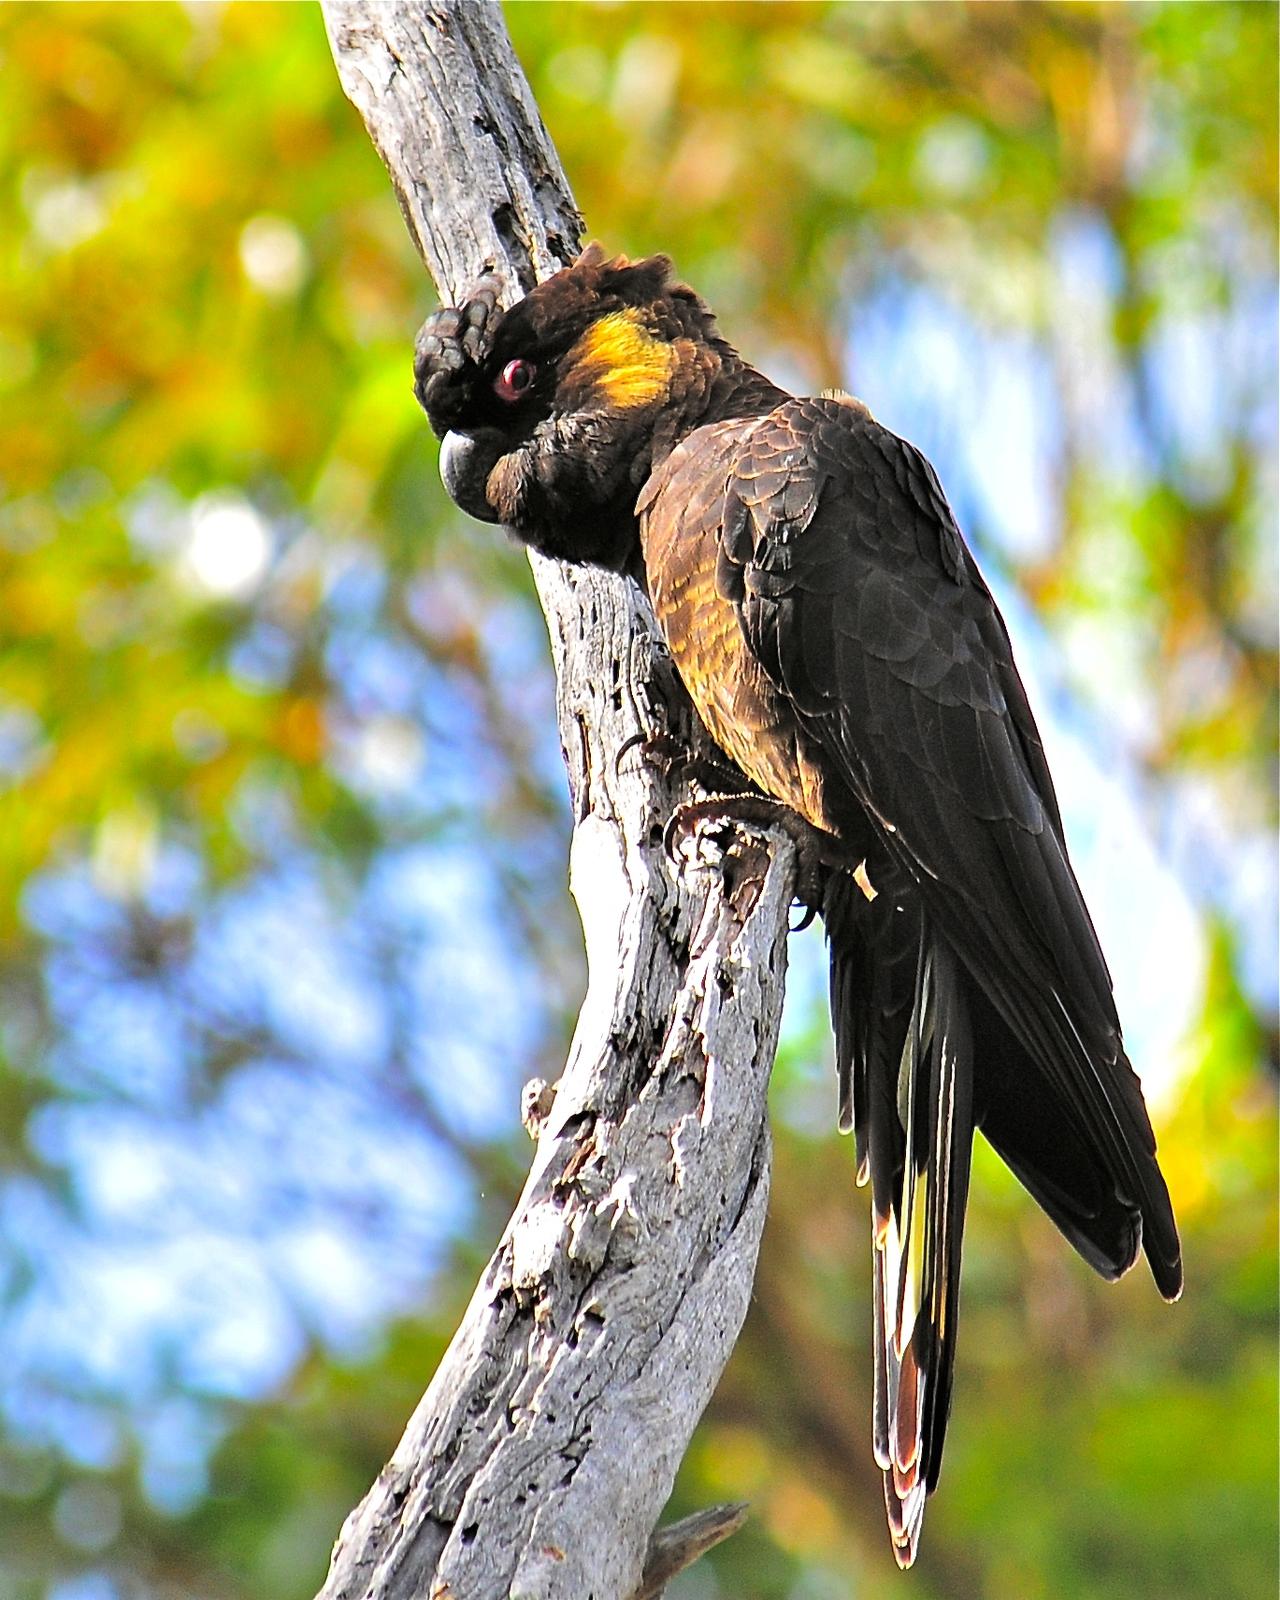 Yellow-tailed Black-Cockatoo Photo by Gerald Friesen